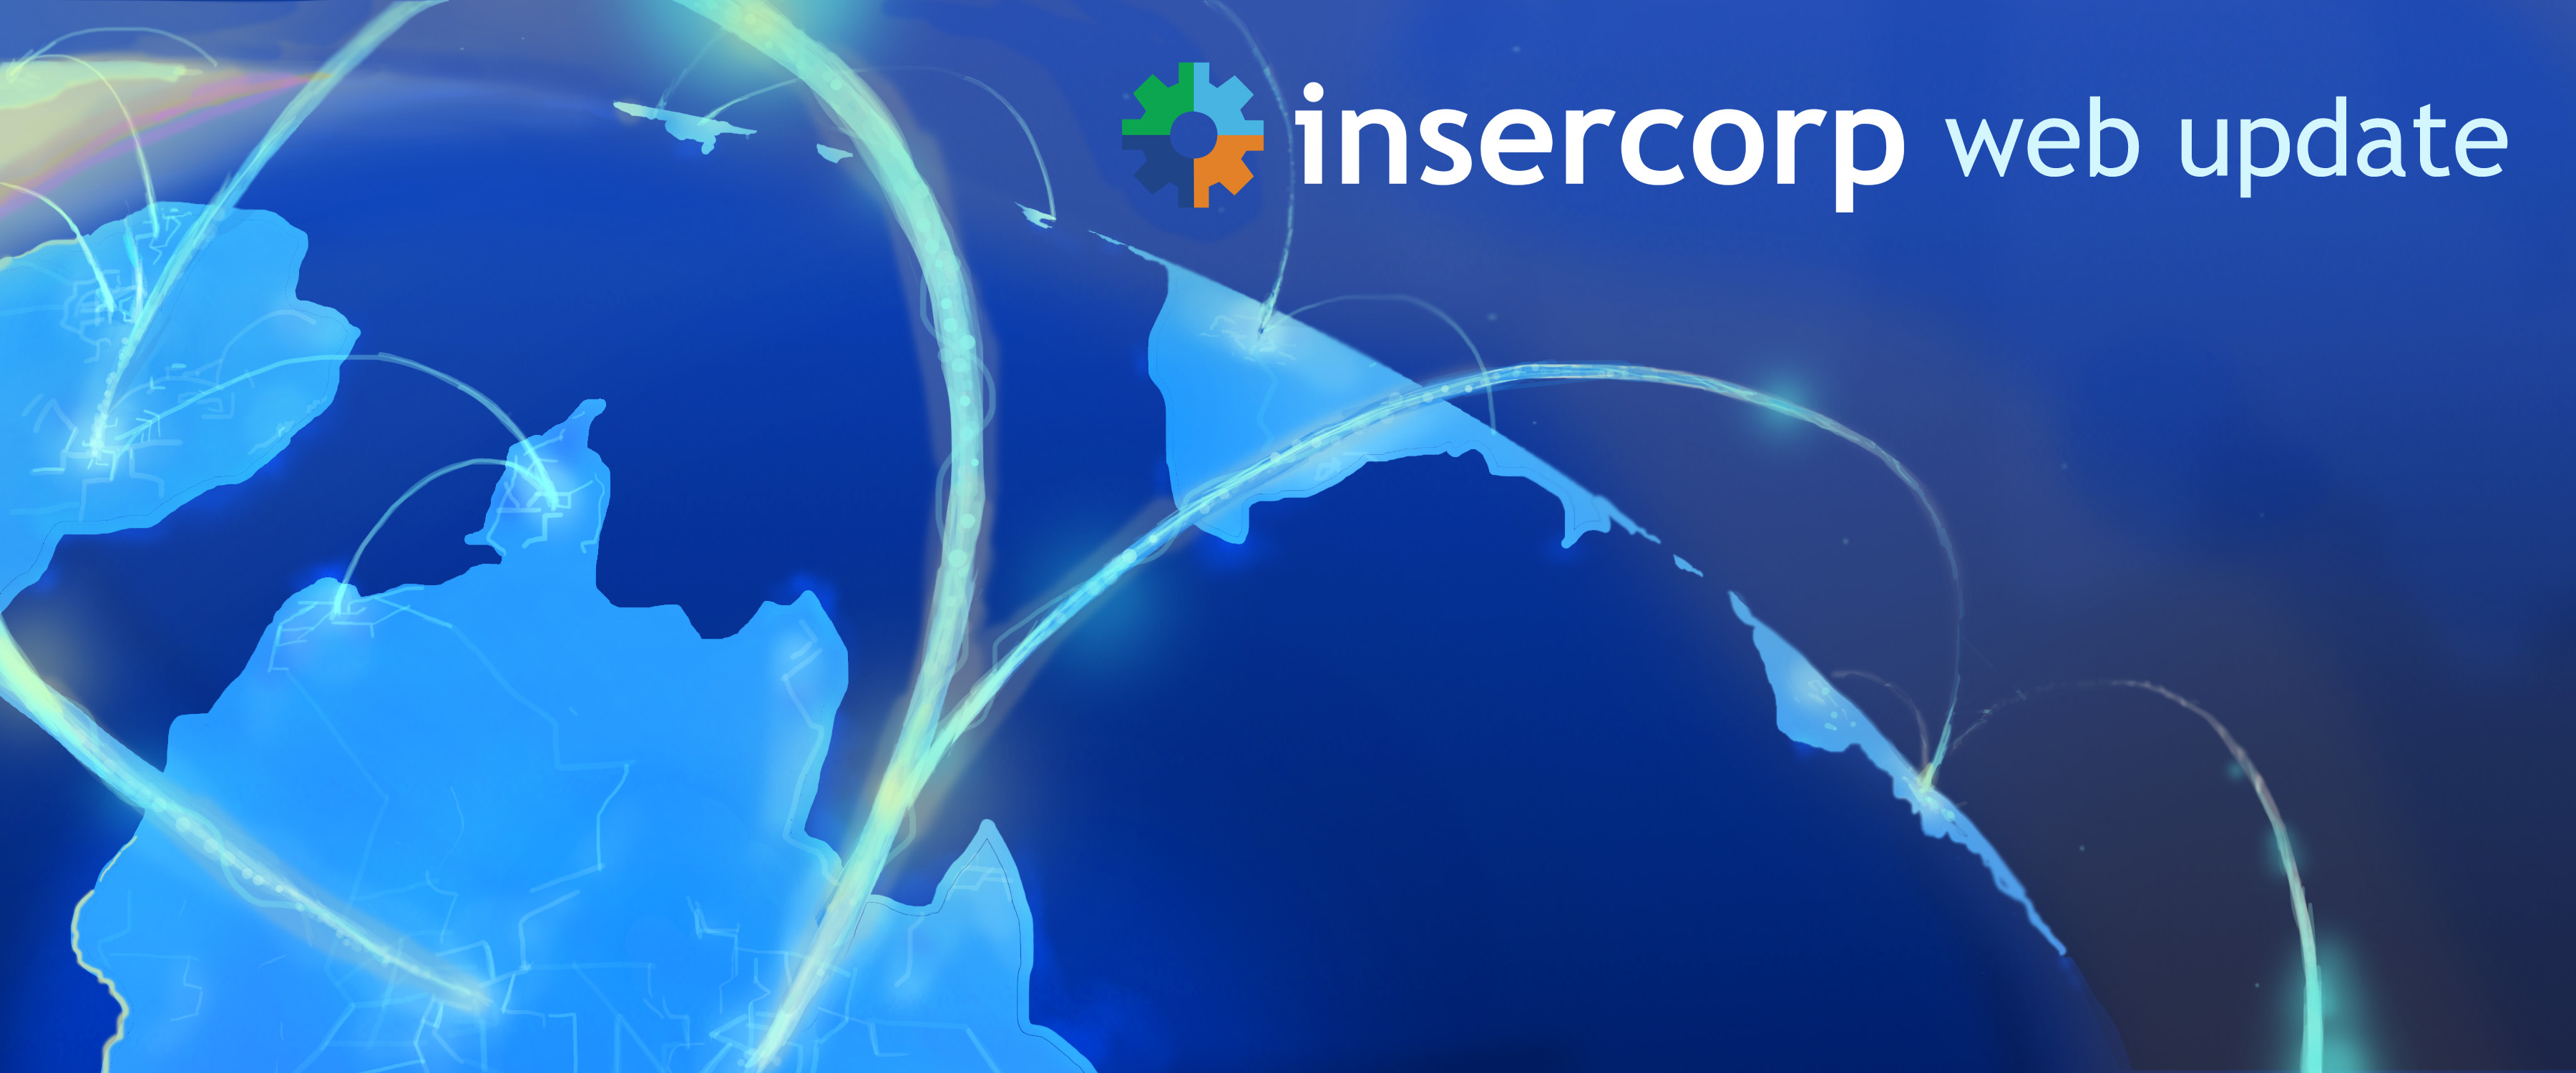 Insercorp Launches New, Improved Web Hosting Services